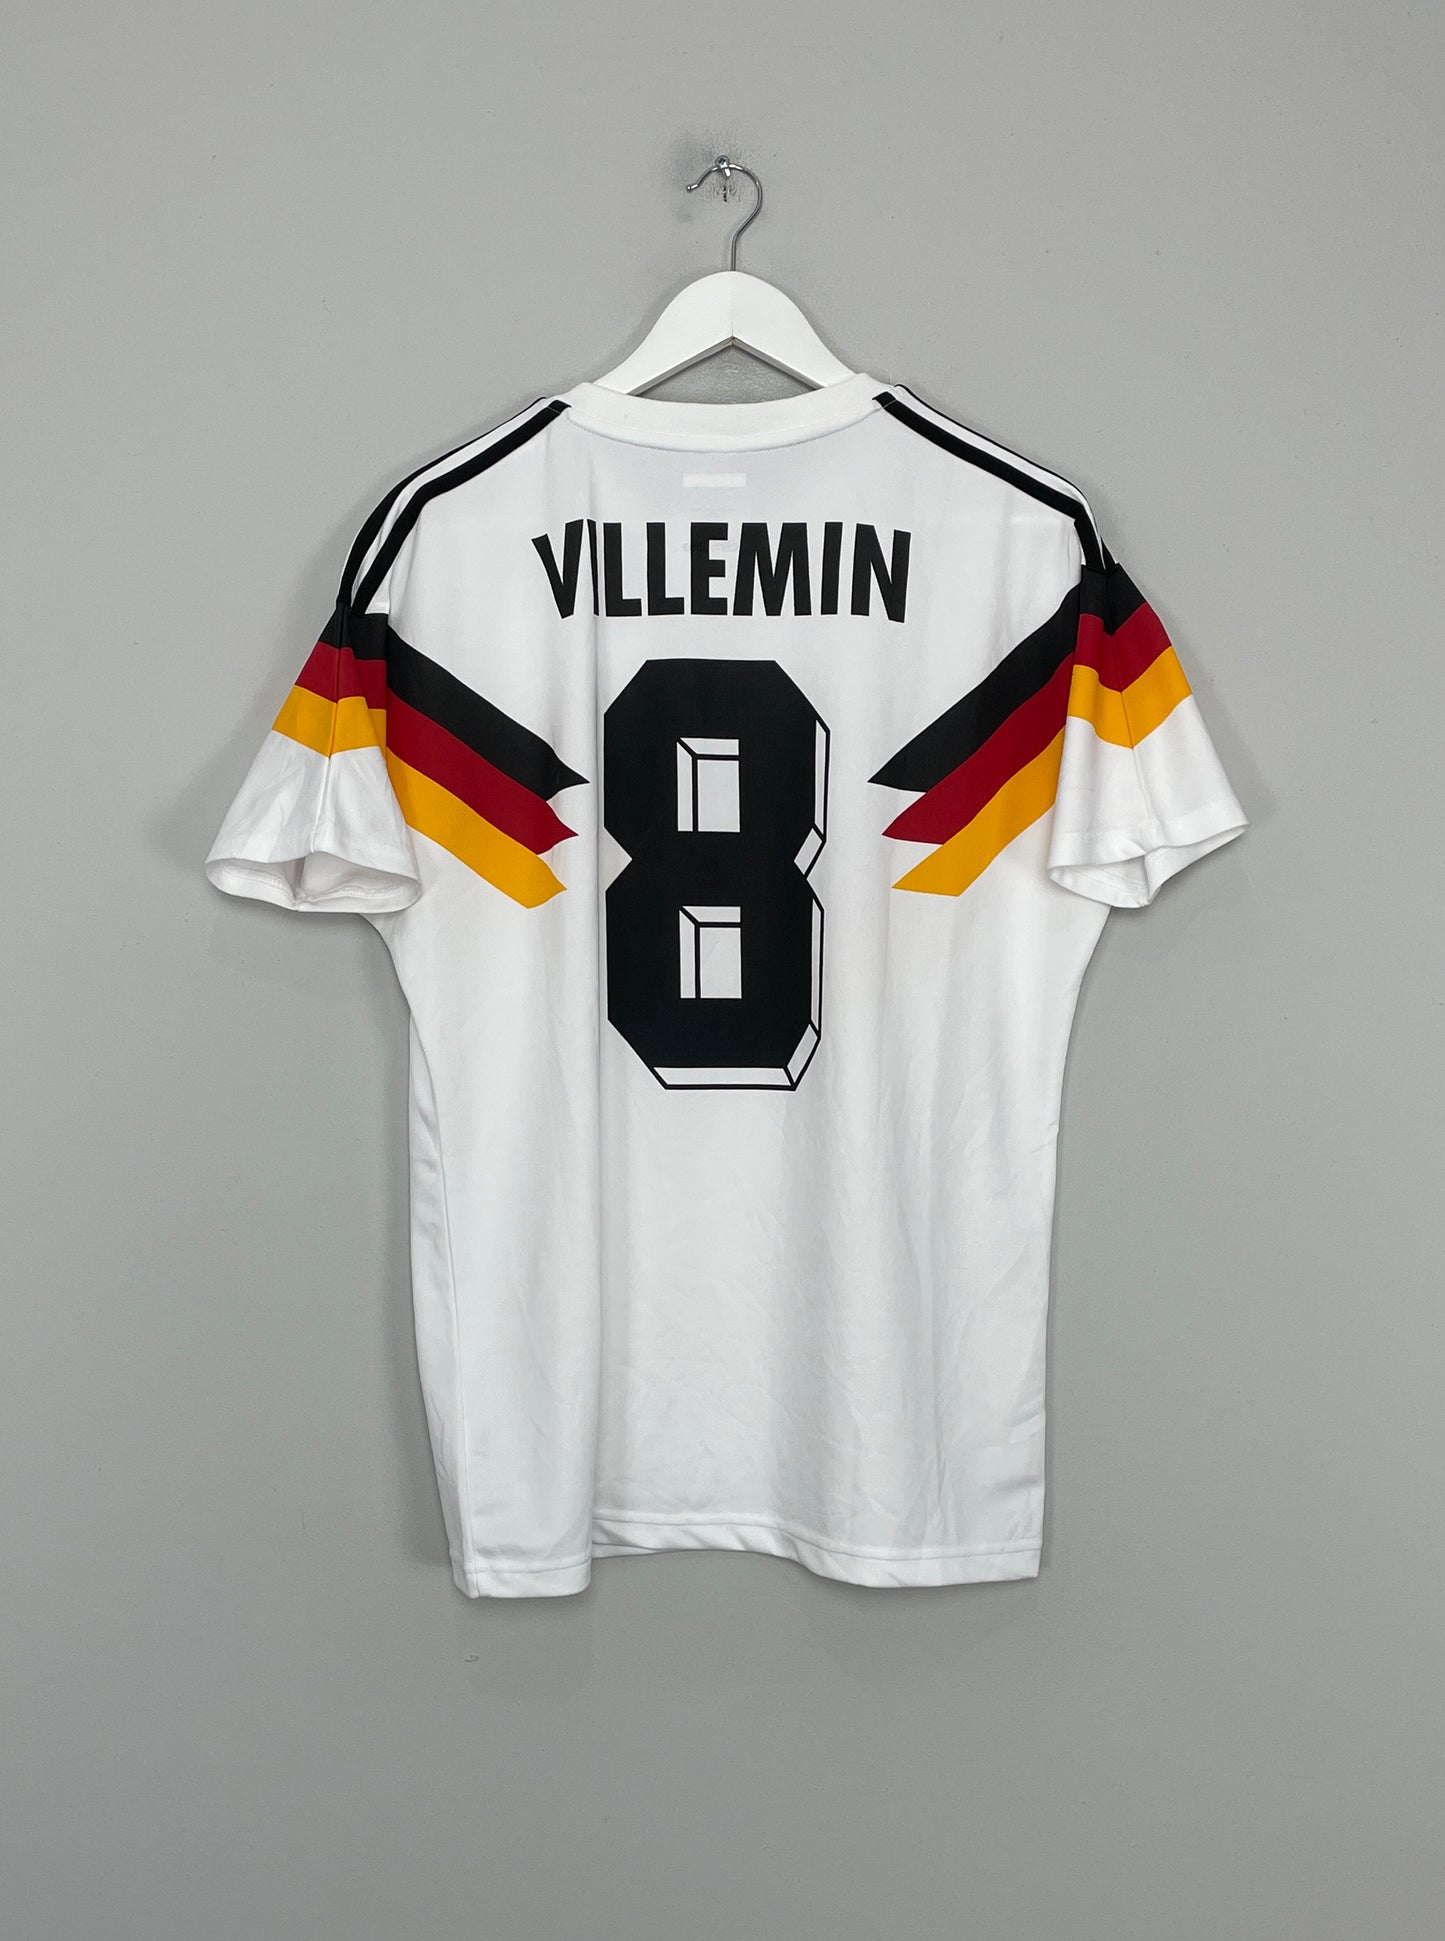 Image of the Germany Villemin shirt from the 2014 season